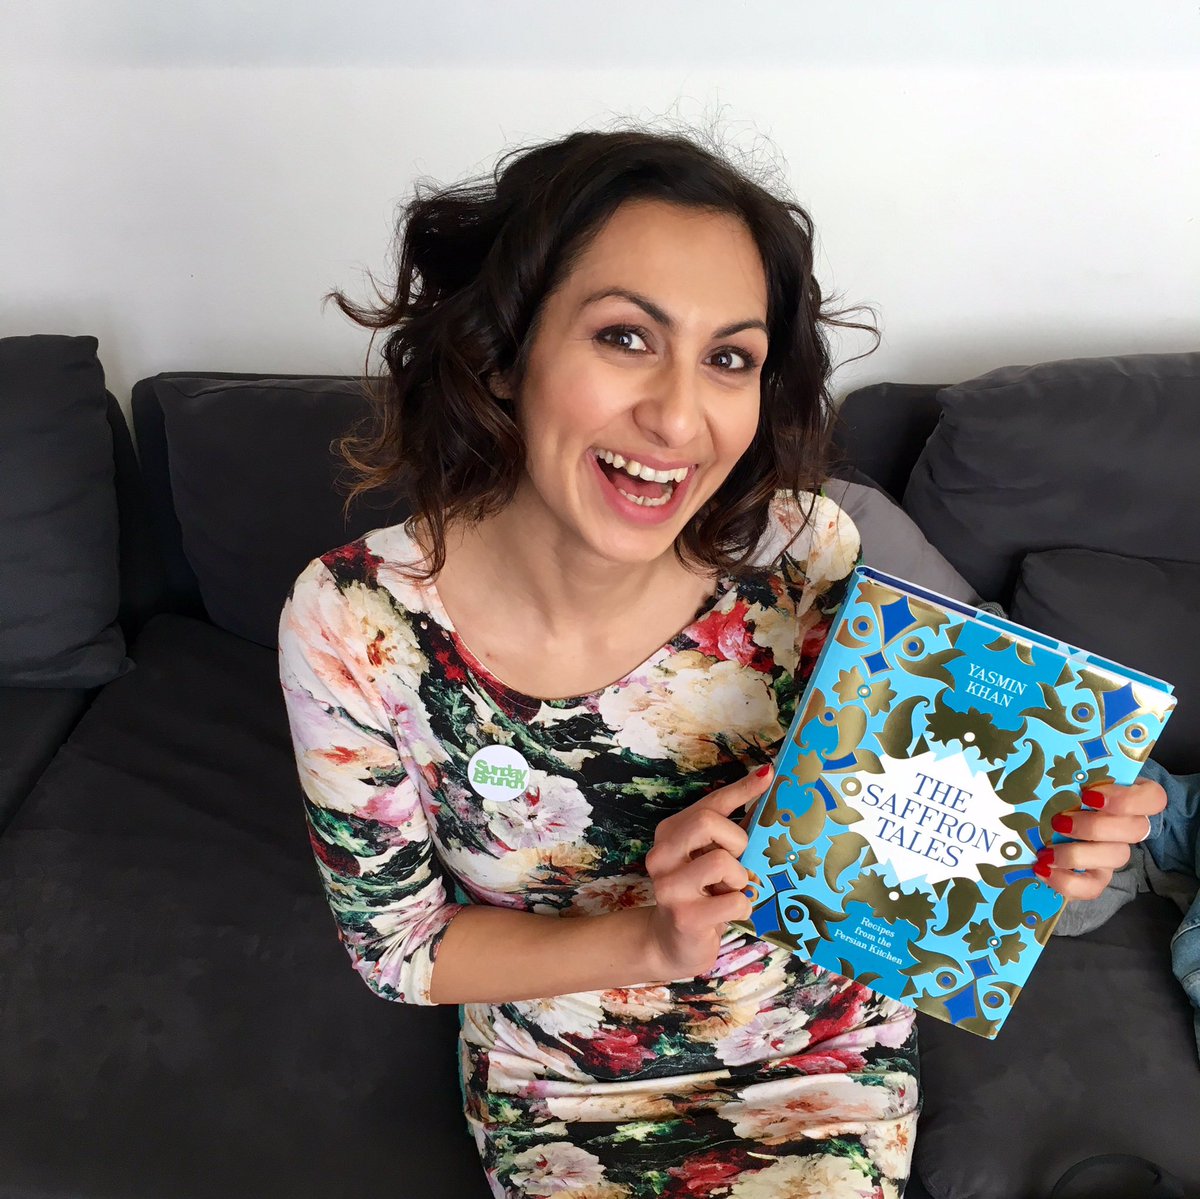 Yasmin Khan Thanks To The Lovely Sundaybrunchc4 Team For Another Fun Morning The Recipes Are All In My Book If You Want To Cook Up Some Persian Treats T Co Kvo2xns0fa